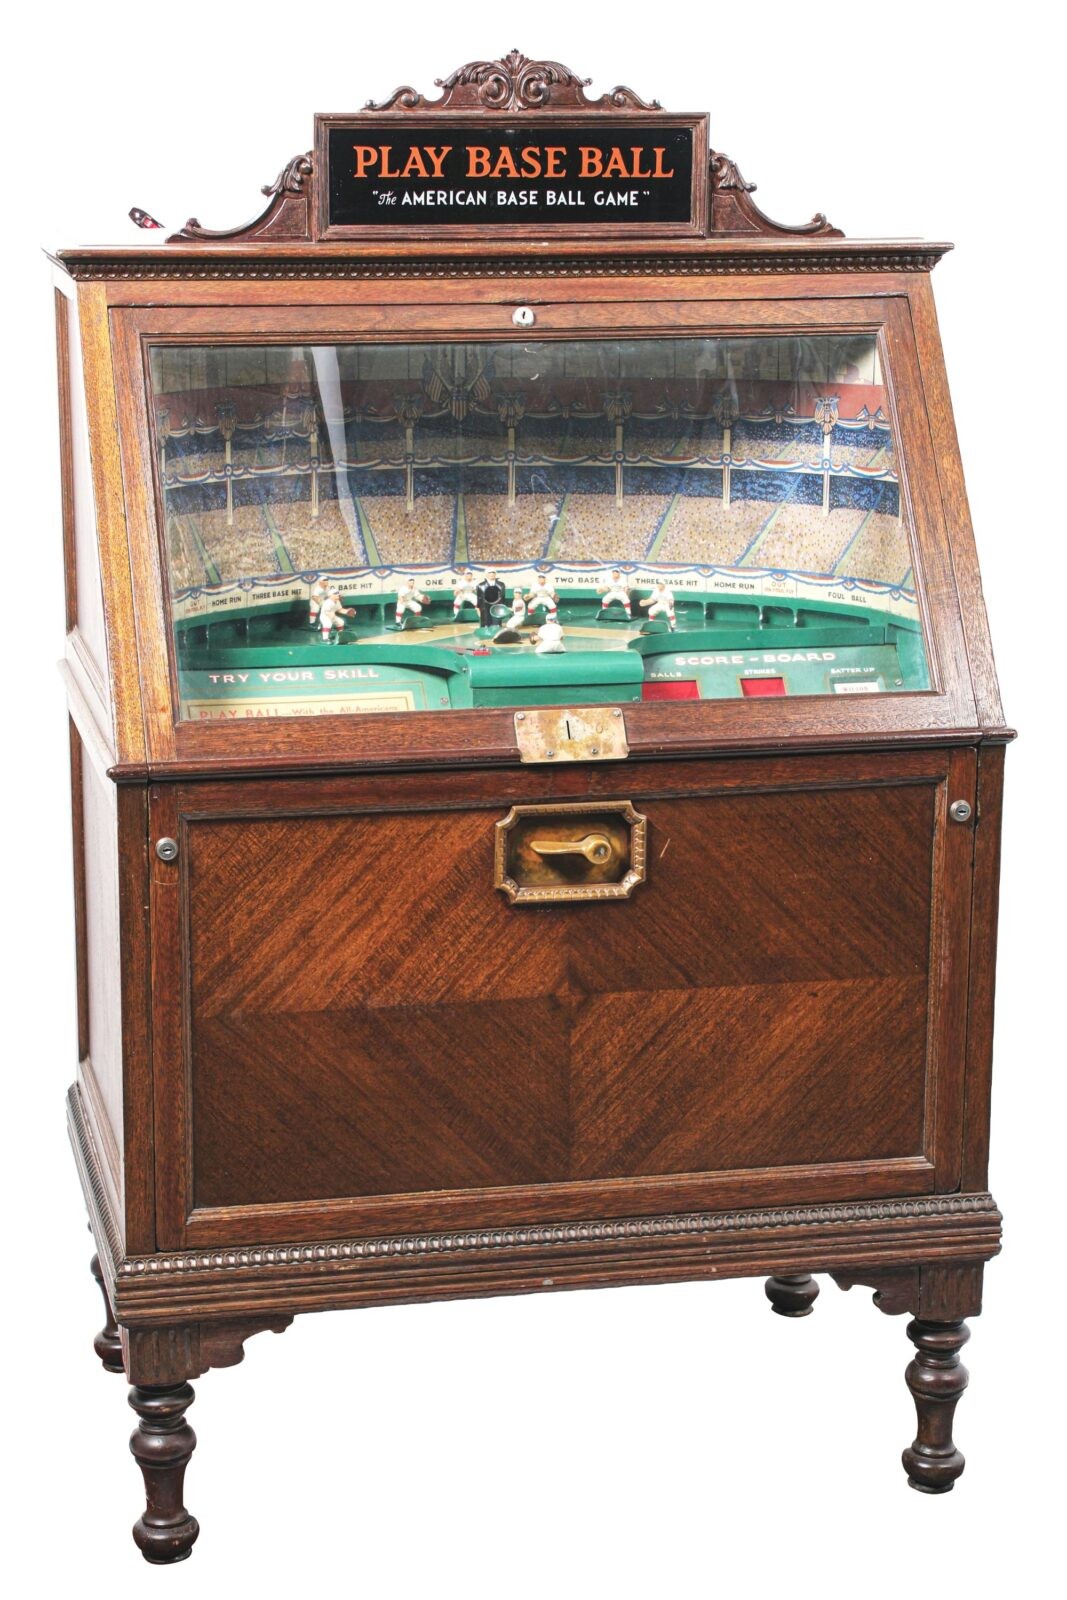 An Amusement Machine Co. 1927 World Series coin-op game, estimated at $40,000-$70,000 at Morphy.